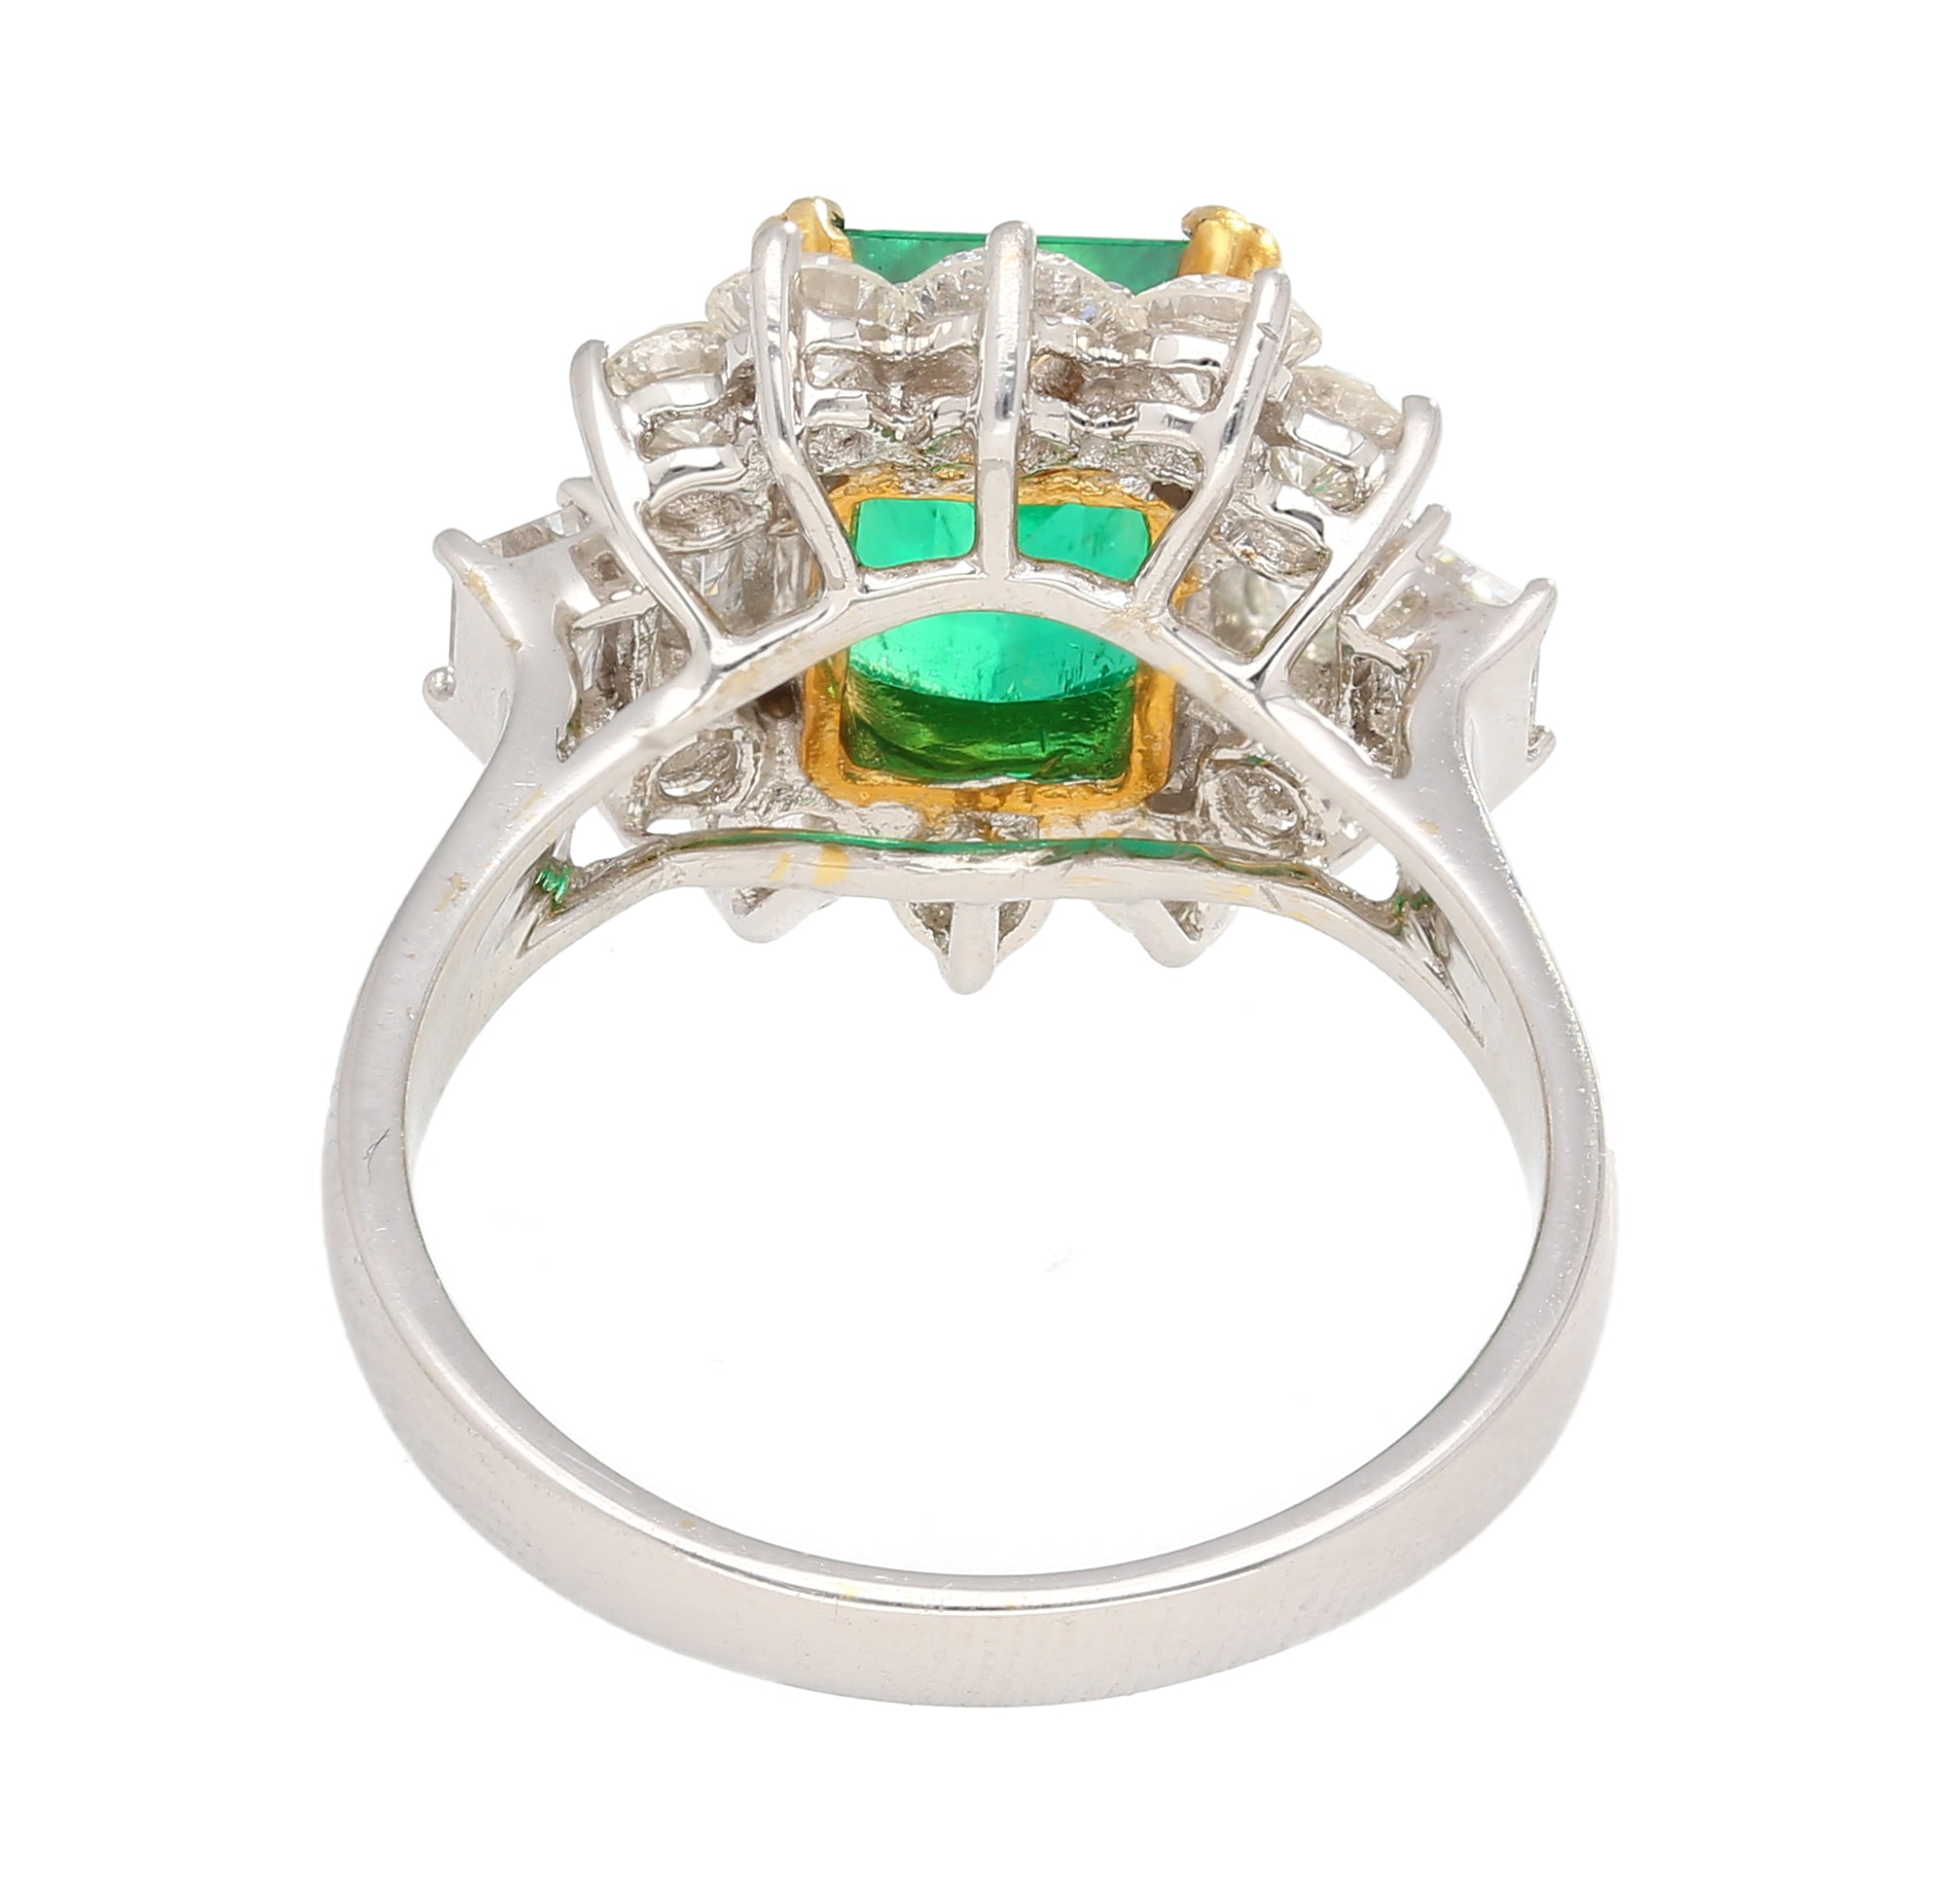 4.42 Carat TW Colombian Emerald with Round & Emerald Cut Diamonds Sides in 18K White Gold